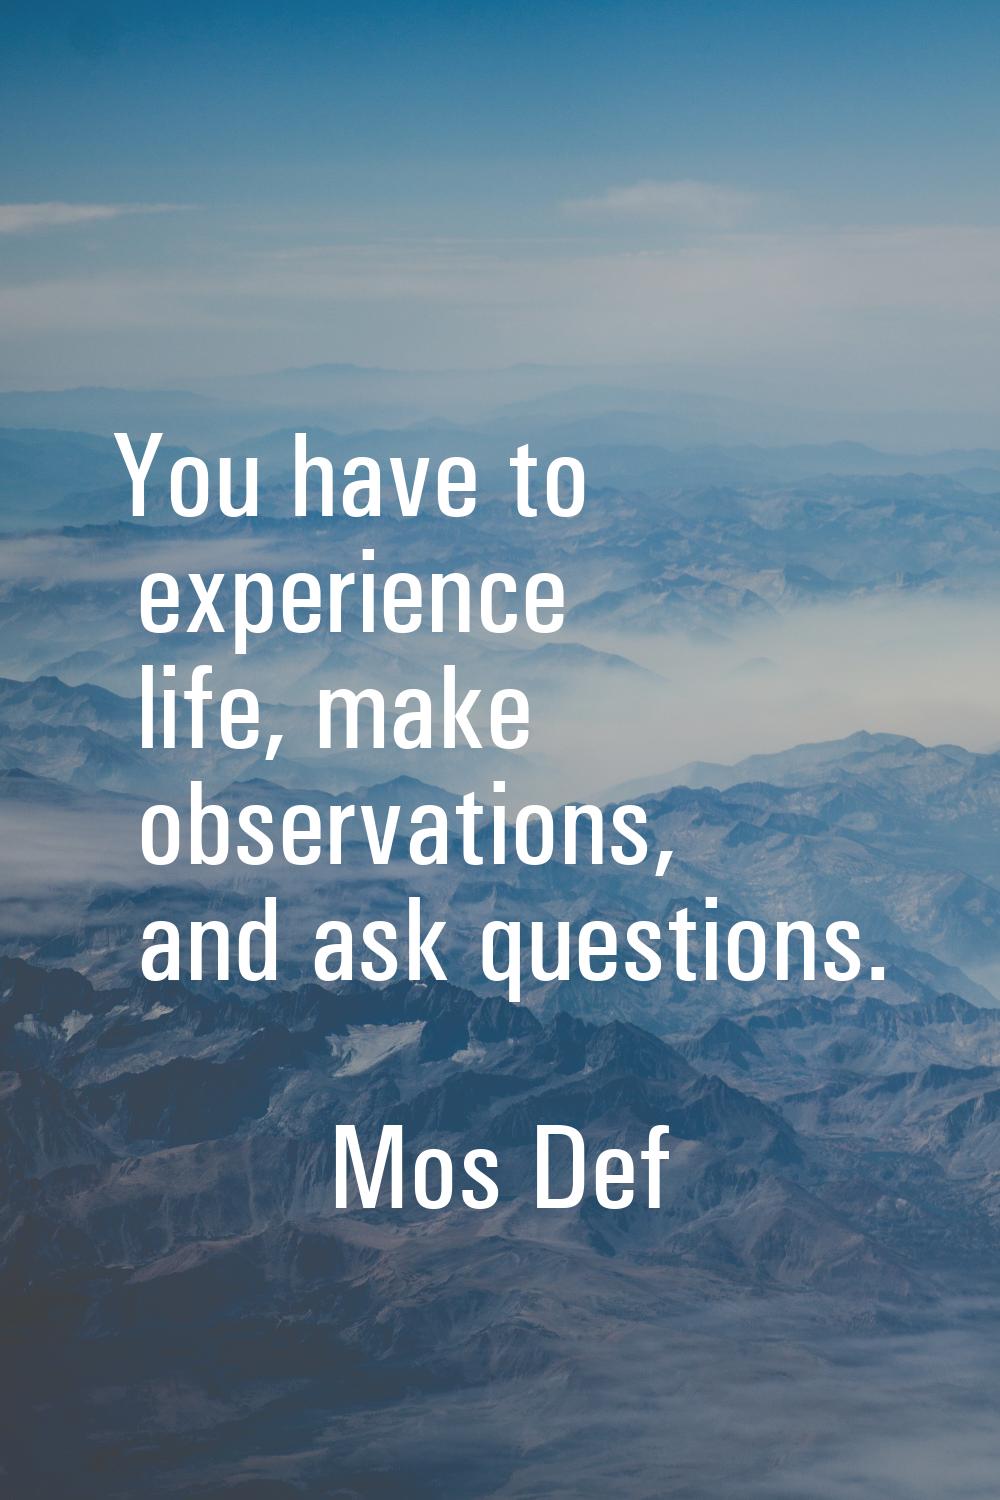 You have to experience life, make observations, and ask questions.